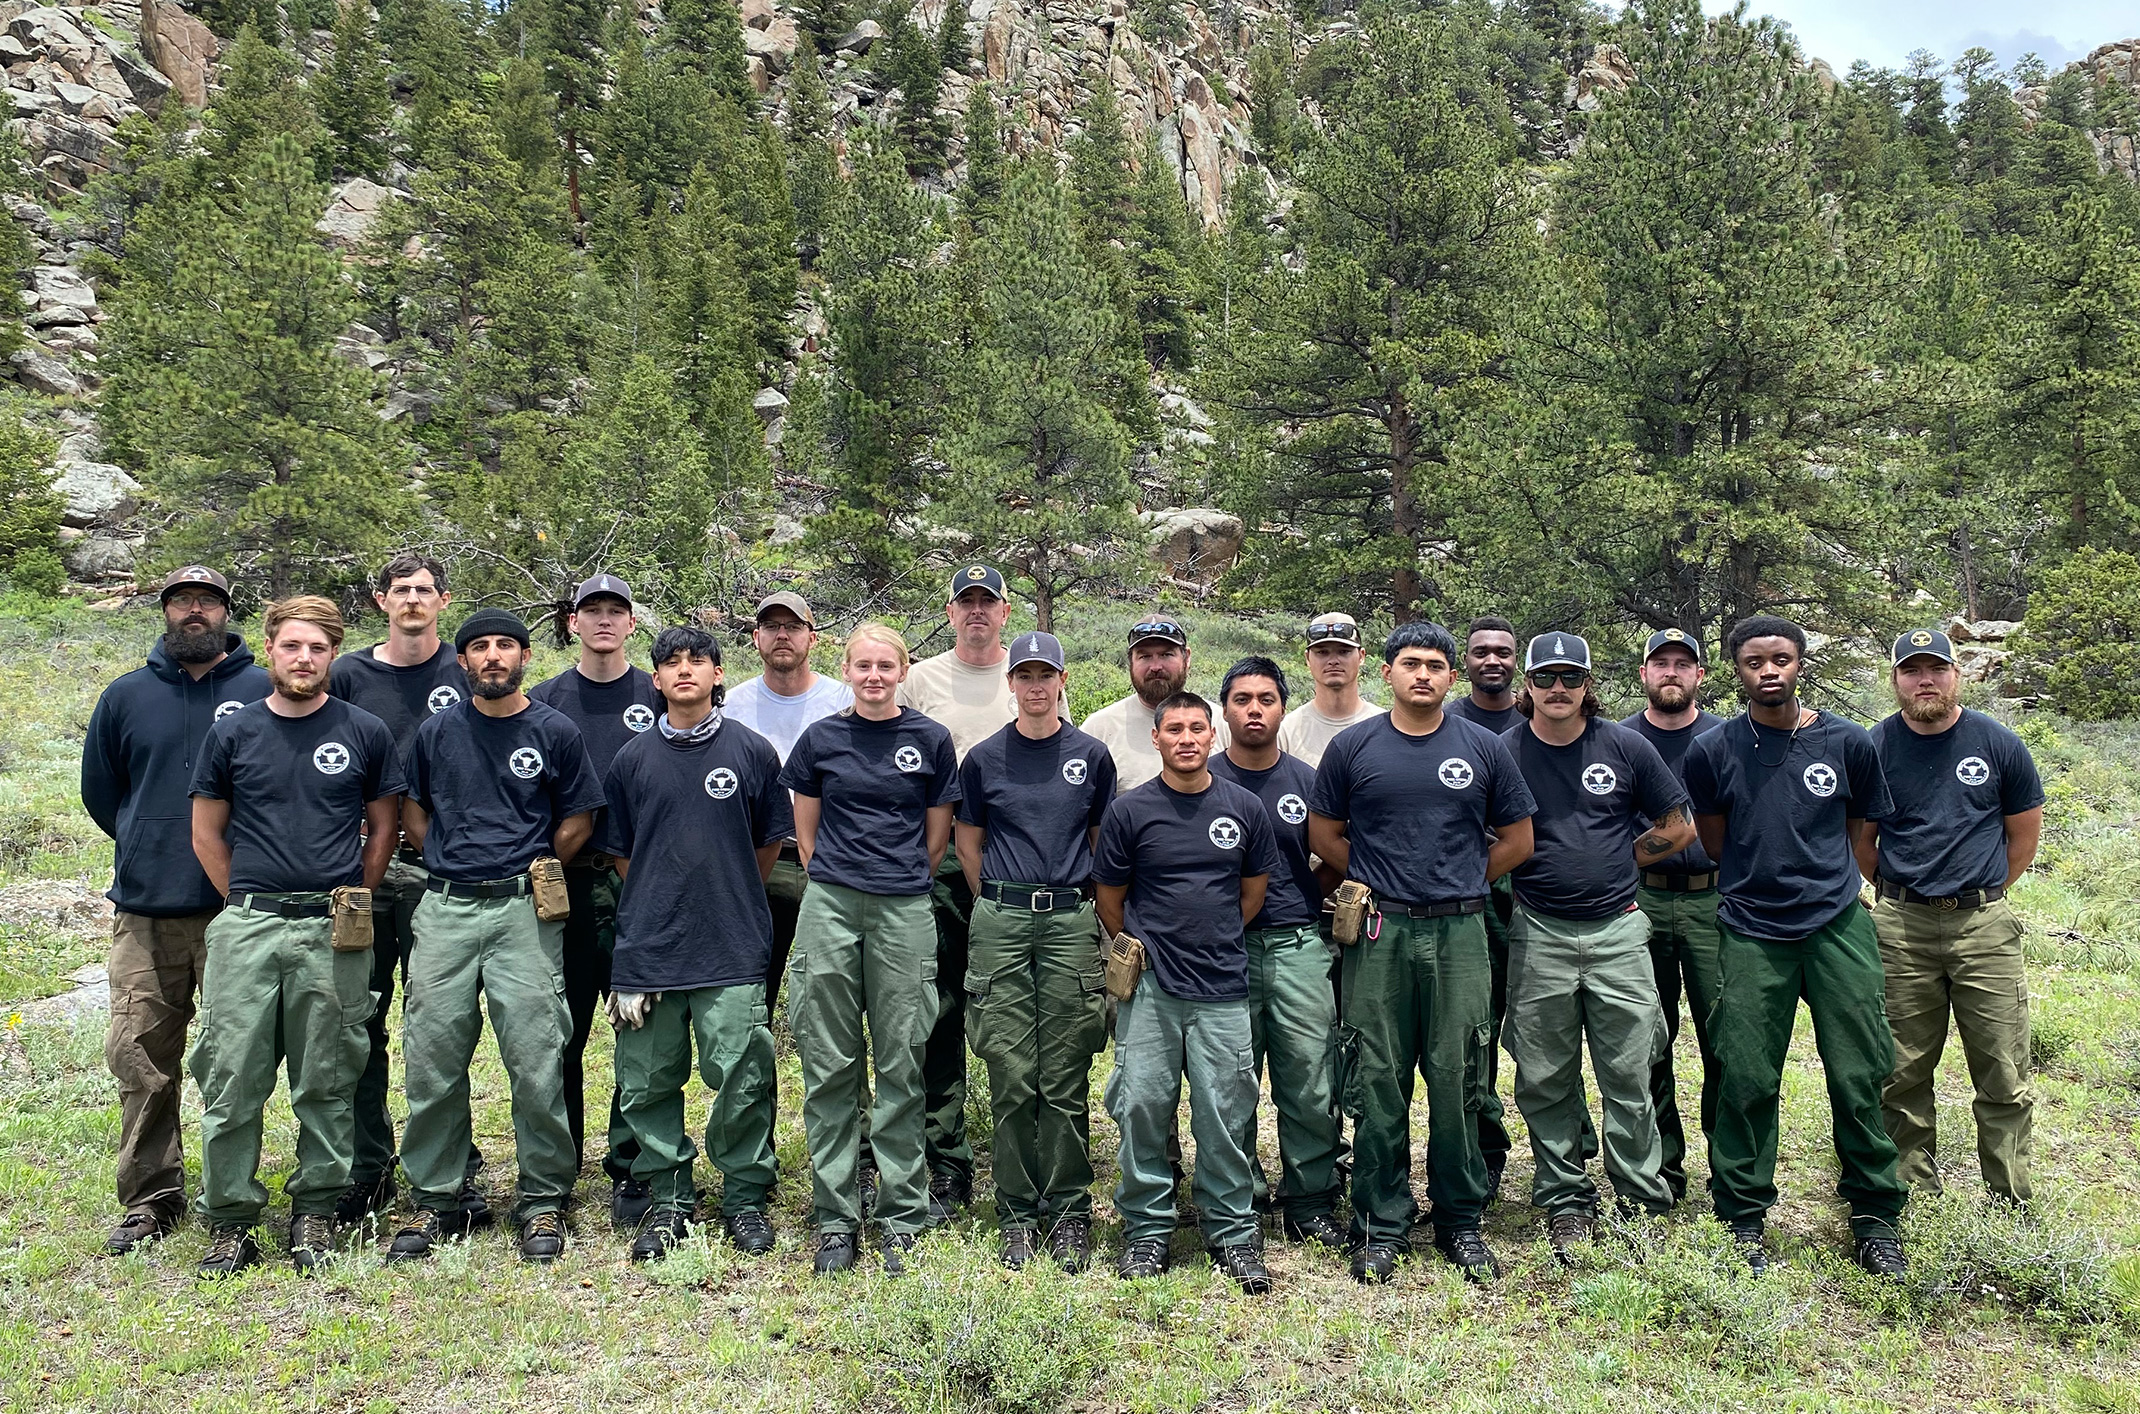 A group photo of the Soldier Creek wildland fire hand crew.